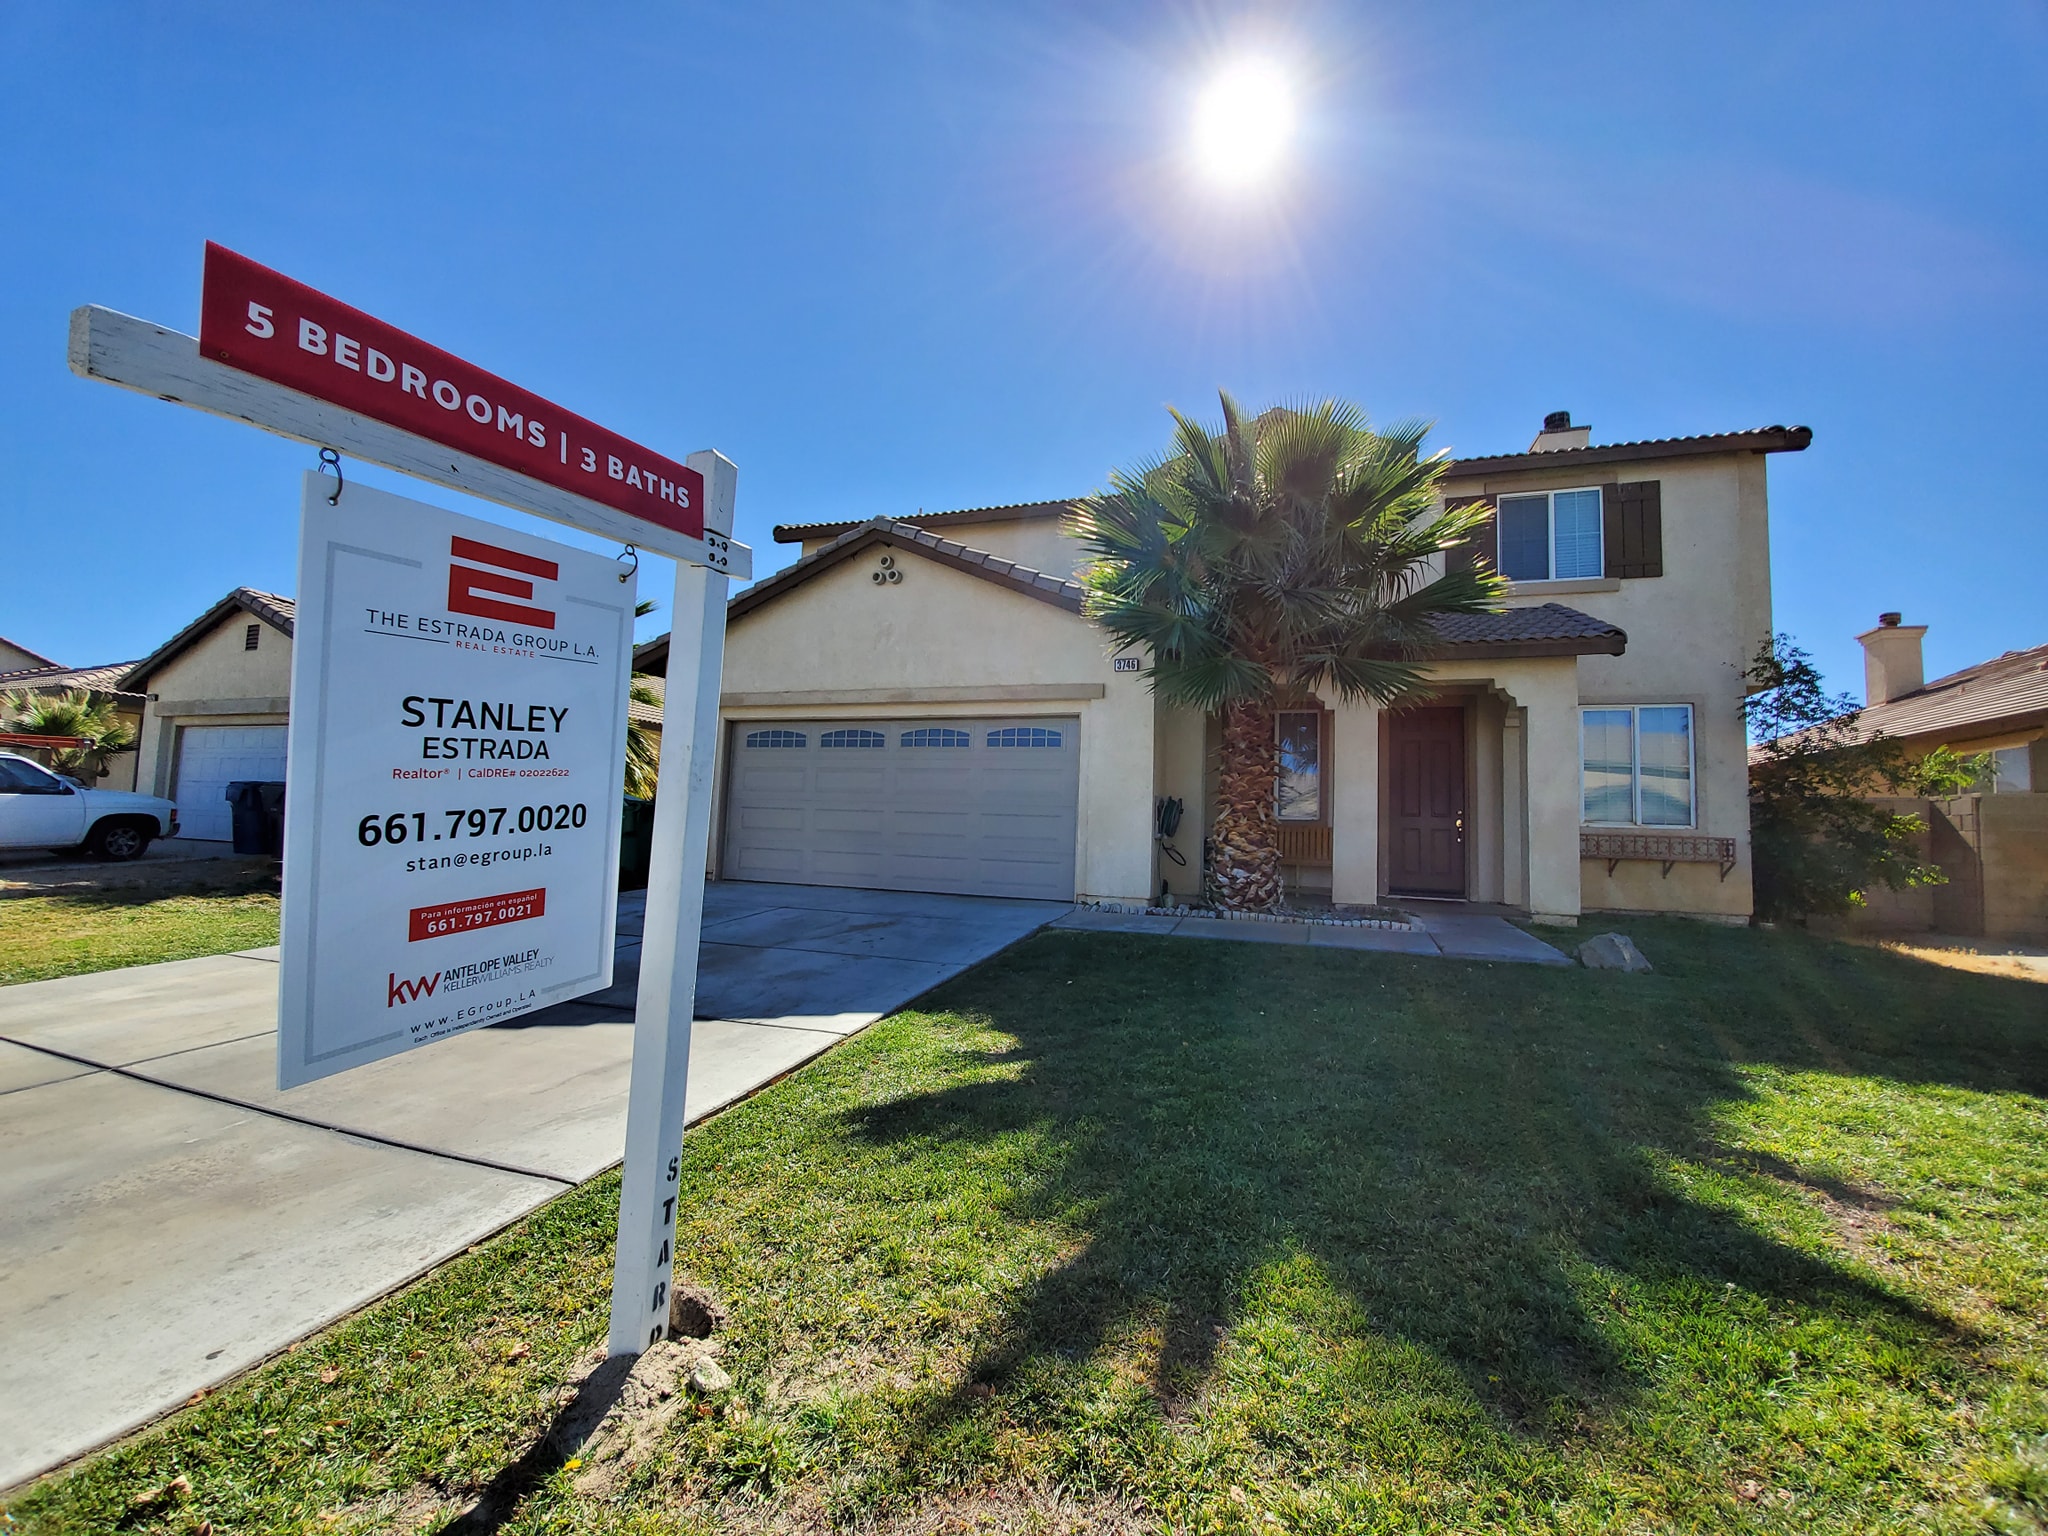 Homes for Sale in Palmdale by Area